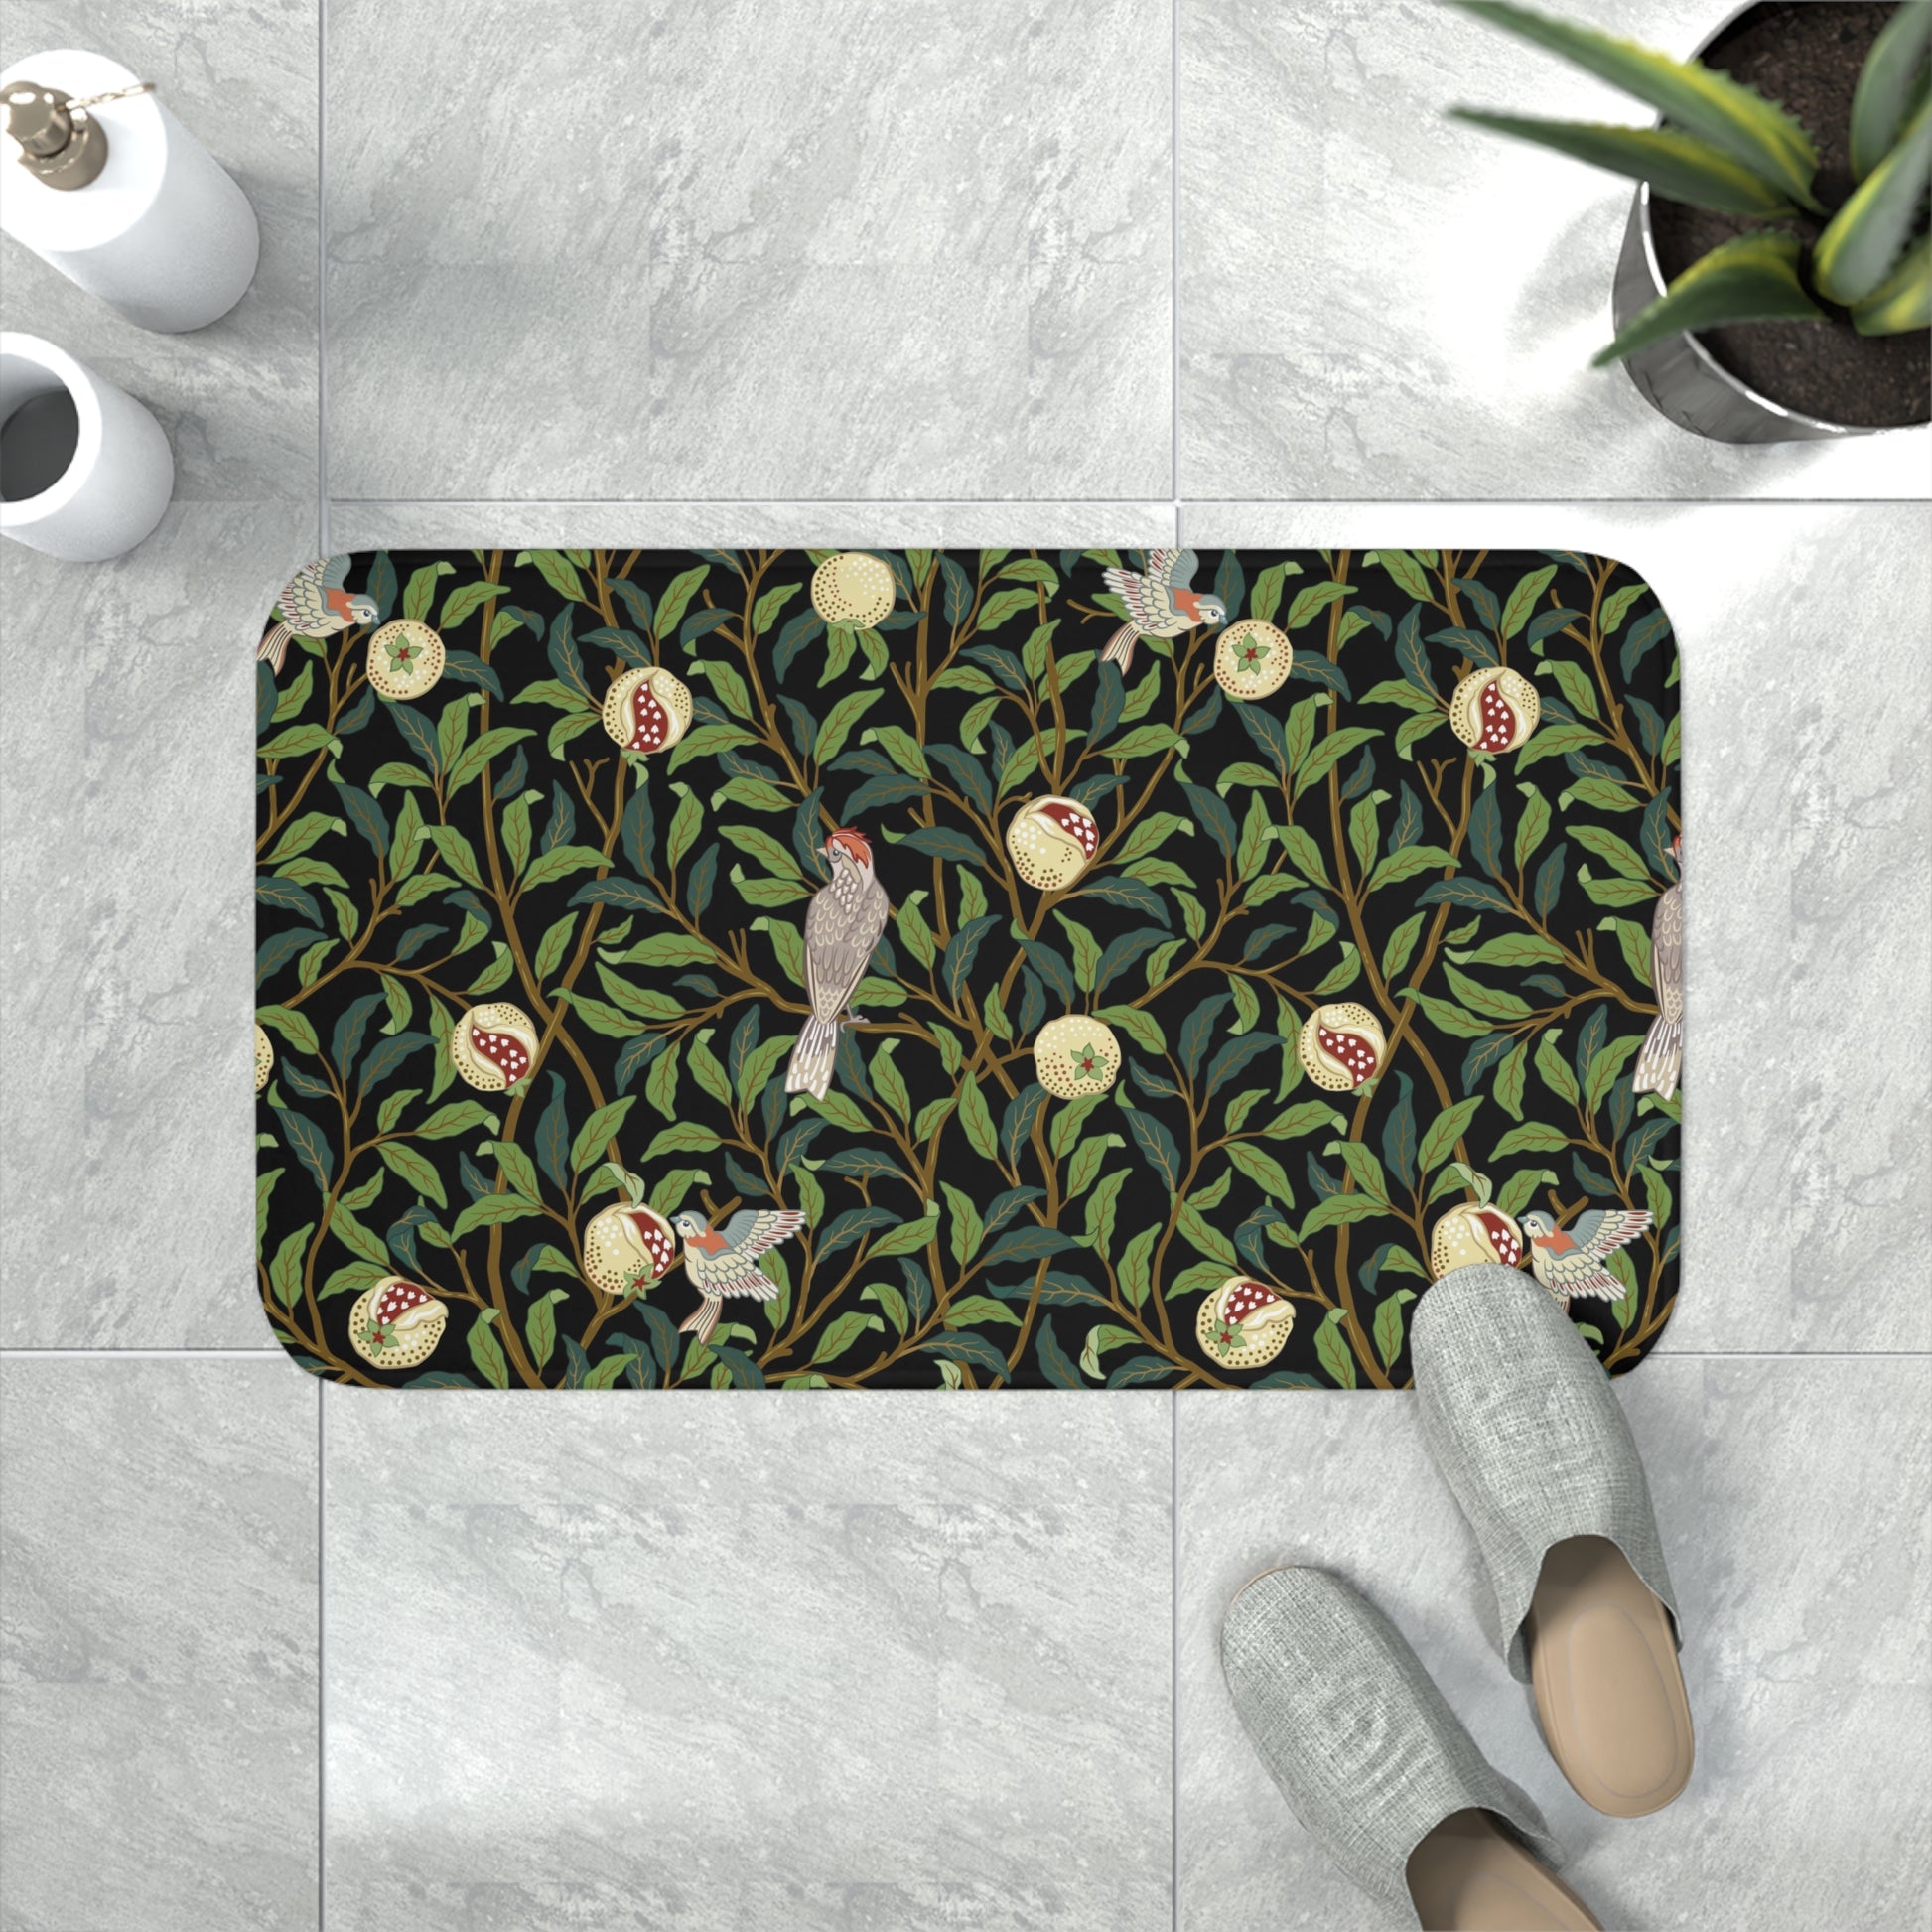 william-morris-co-memory-foam-bath-mat-bird-and-pomegranate-collection-onyx-3